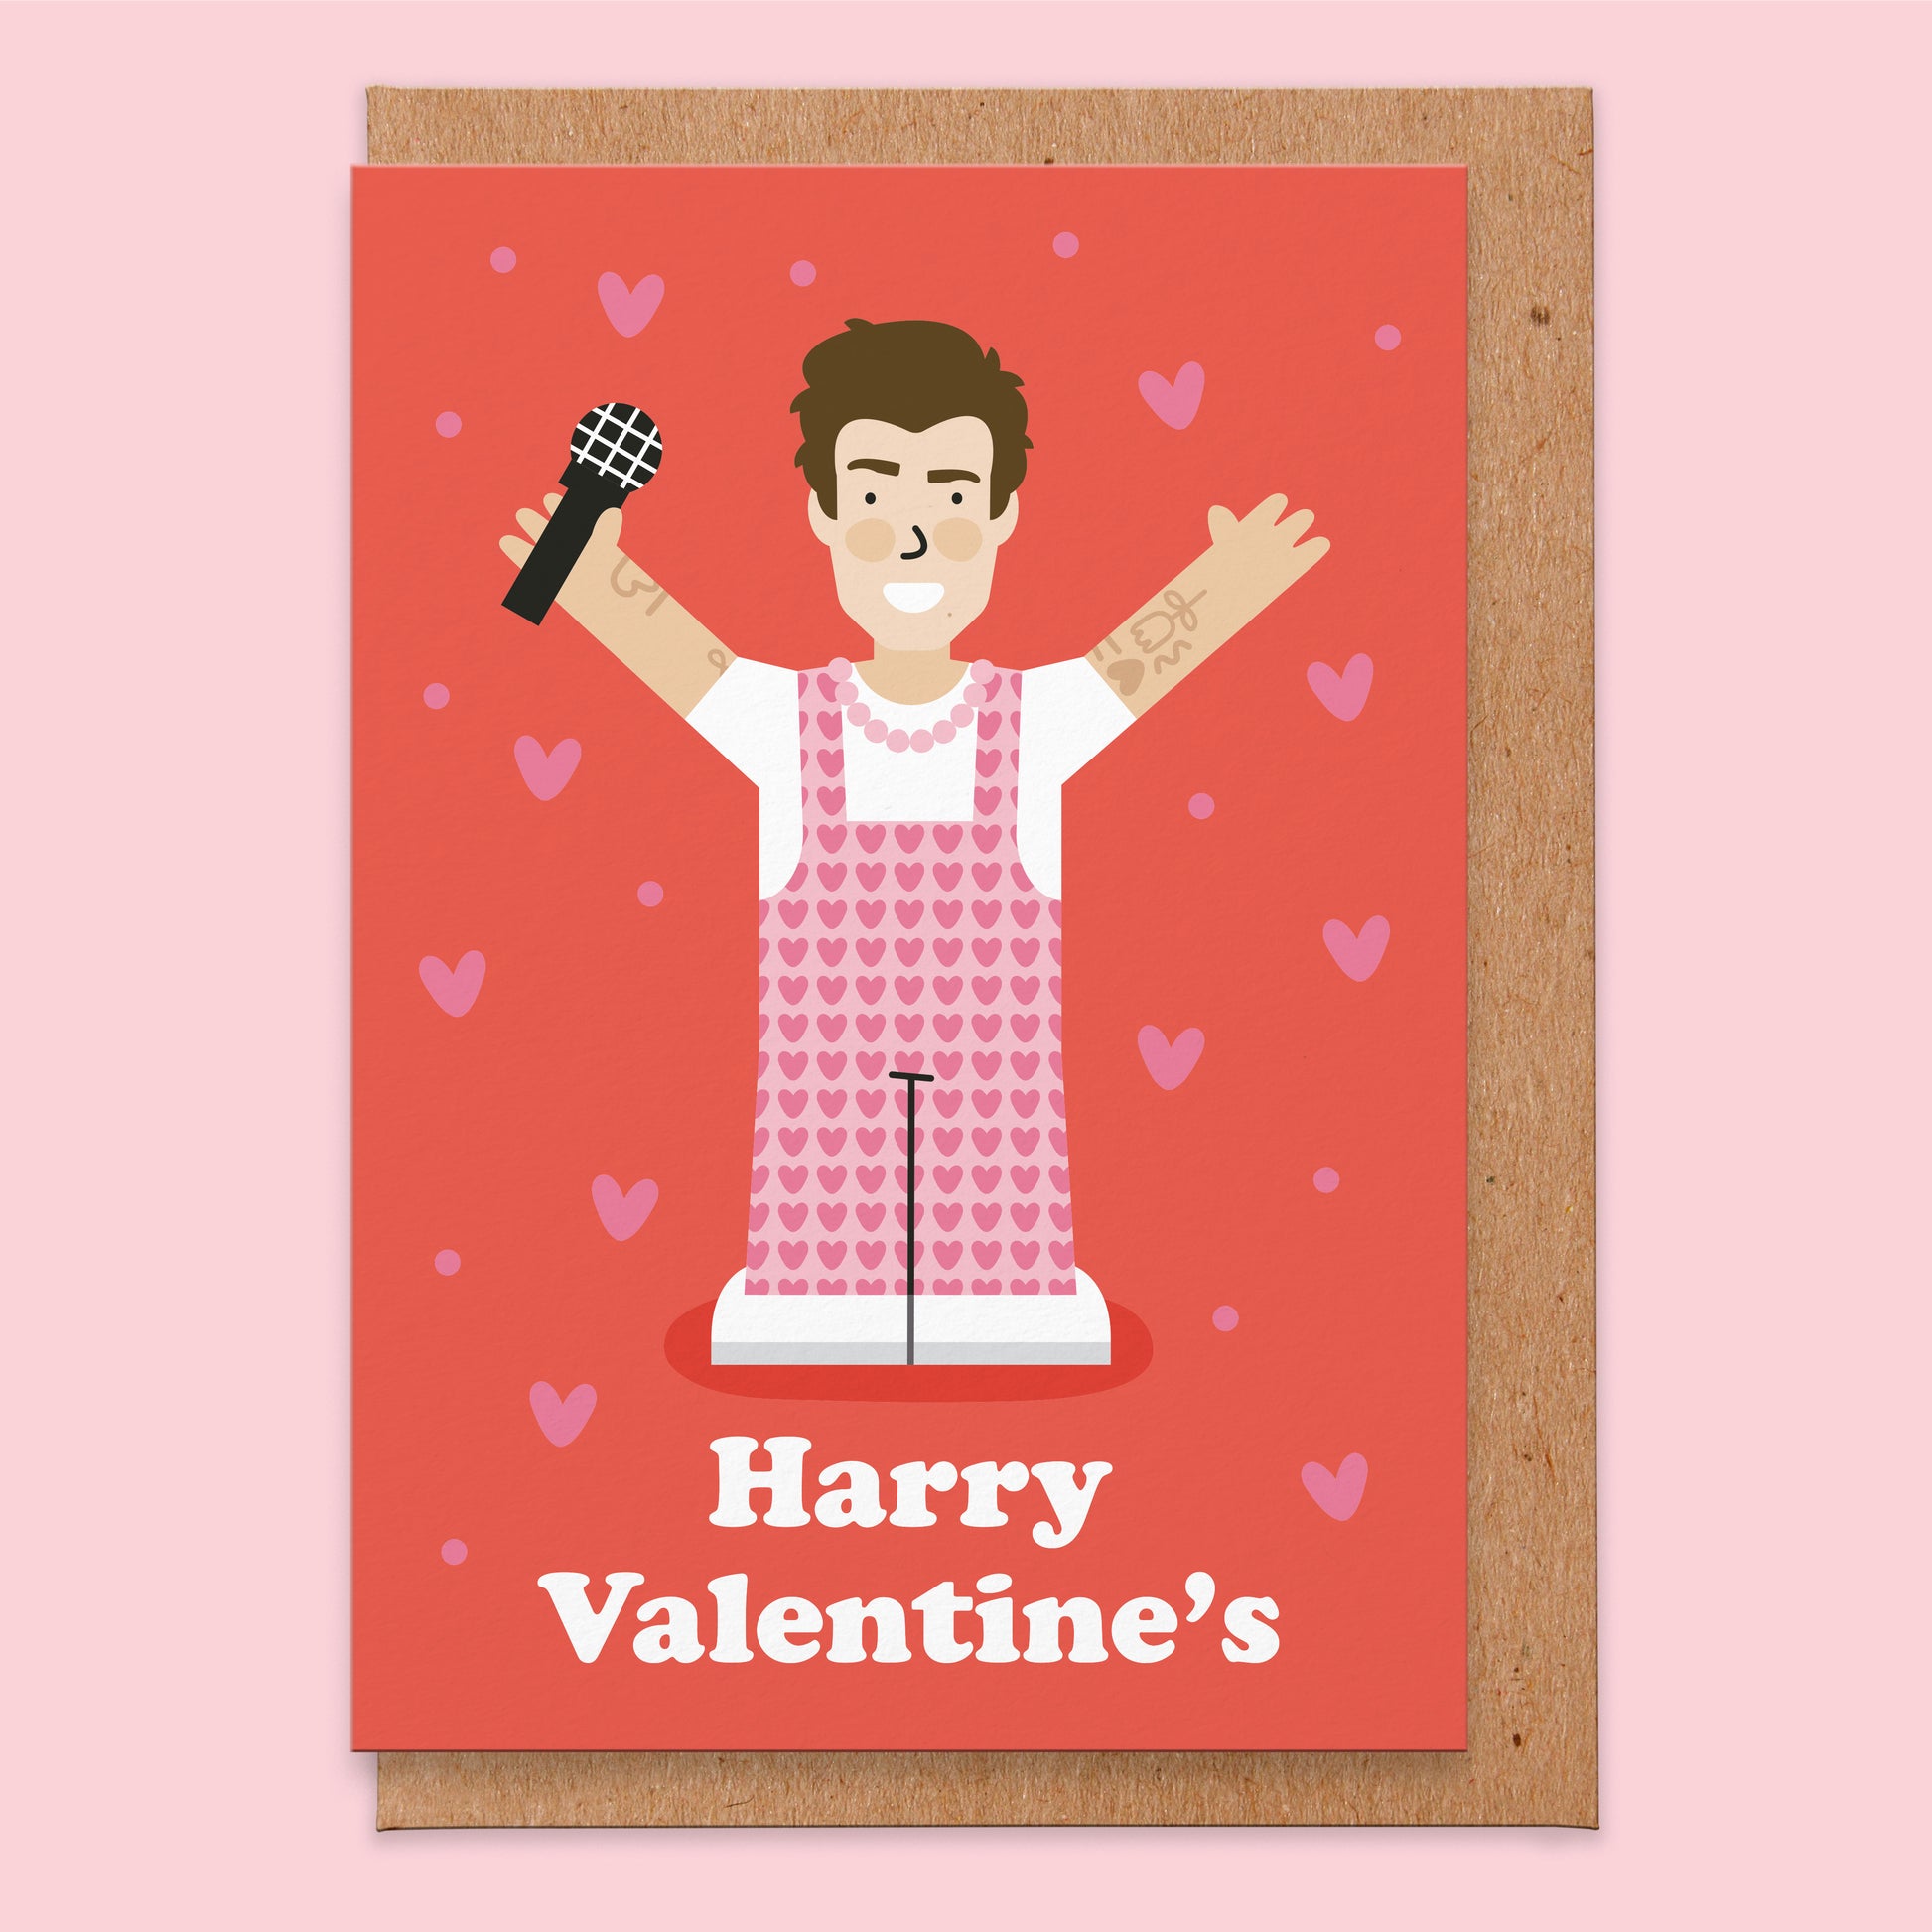 Valentine's card with an illustration of pop star.